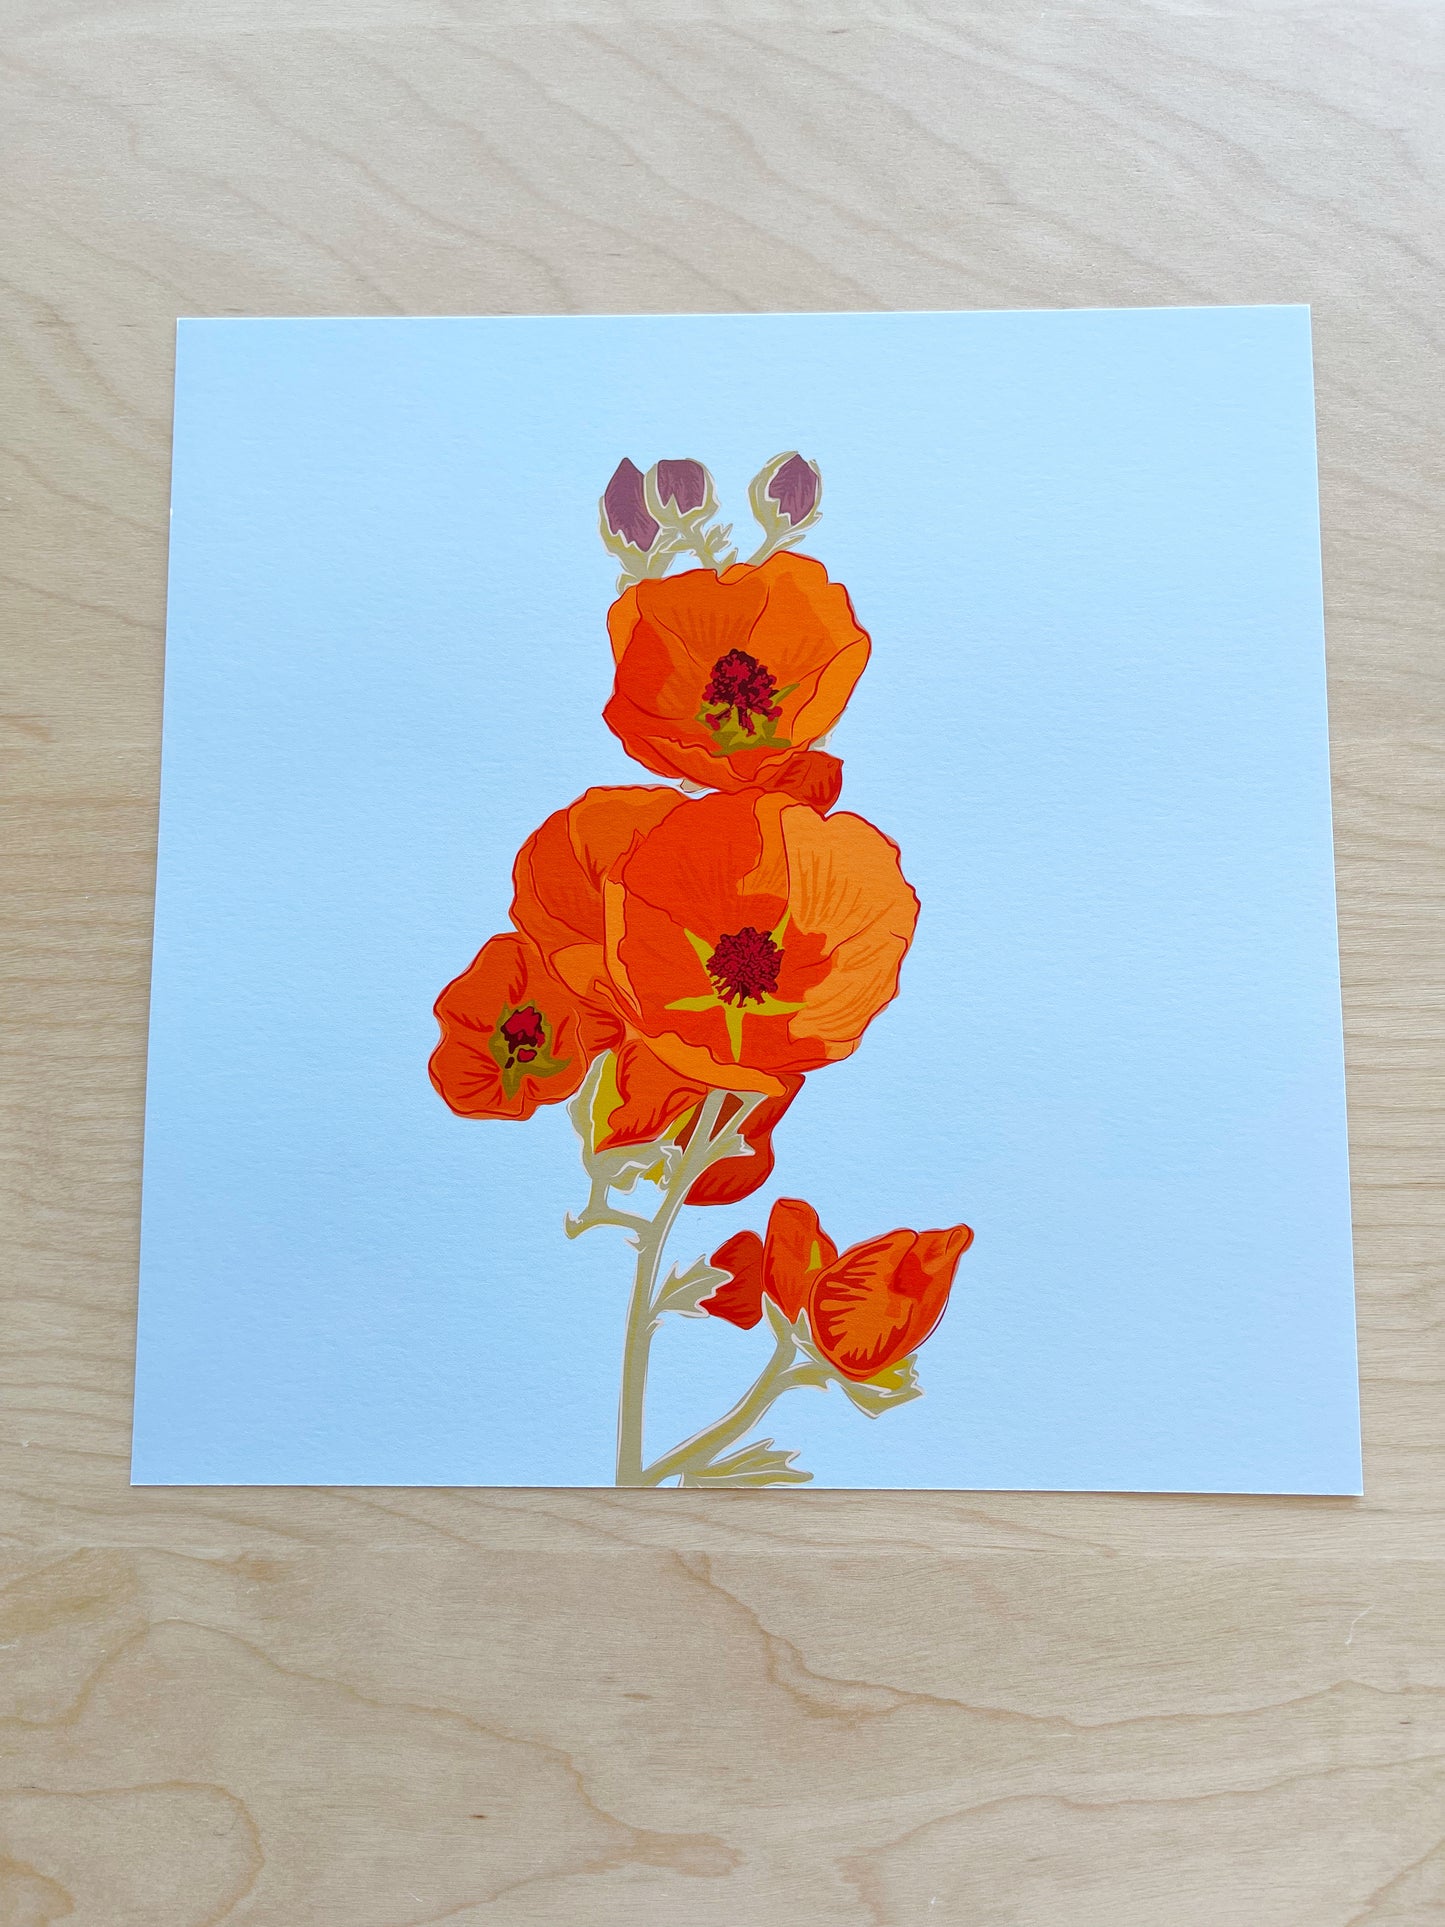 C. Print of my Apricot Globe Mallow drawing 8” square with a blue background